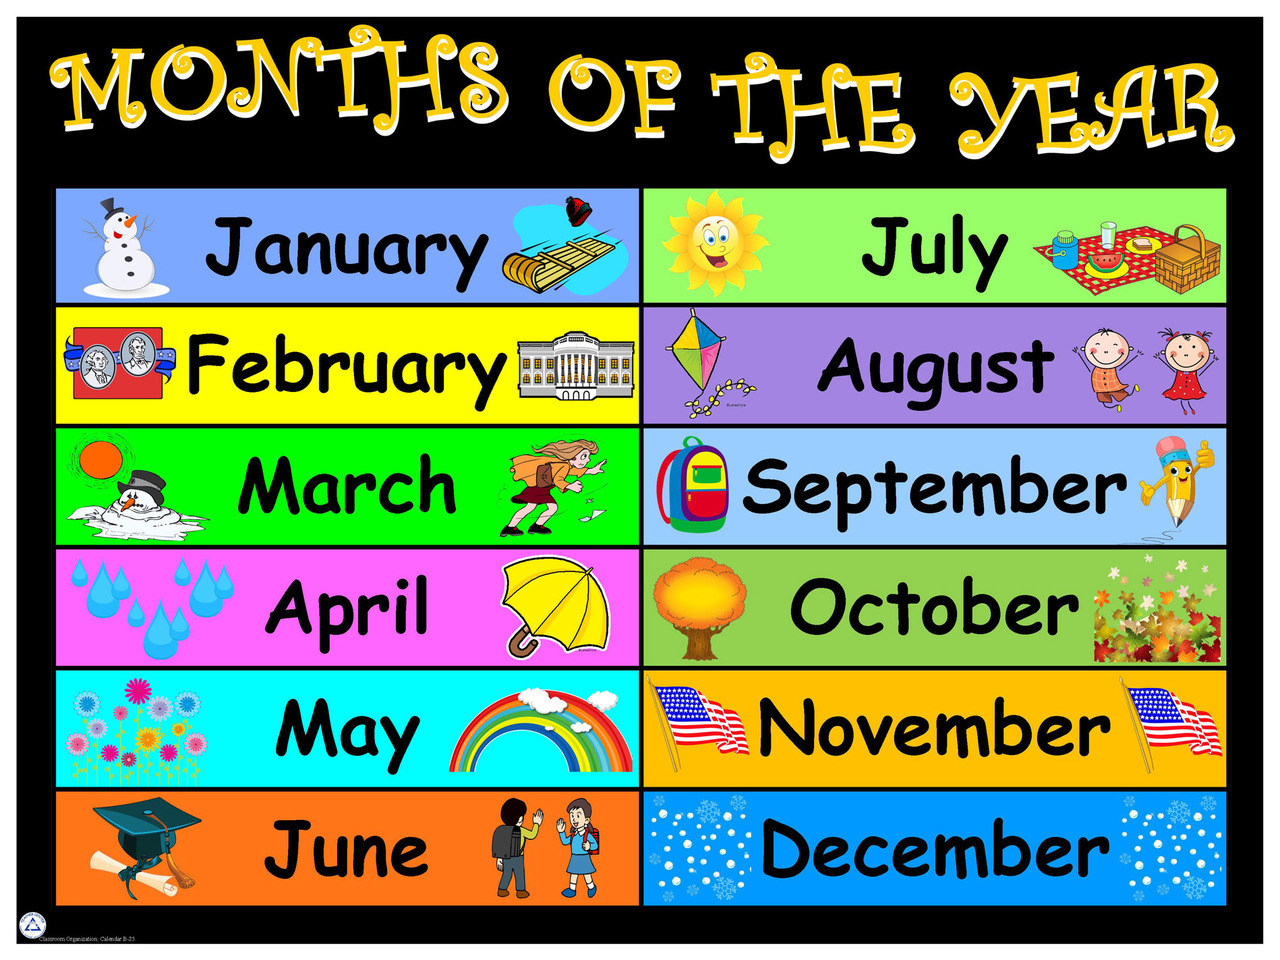 mrs-rania-s-e-class-class-d-unit-3-lesson-1-months-and-seasons